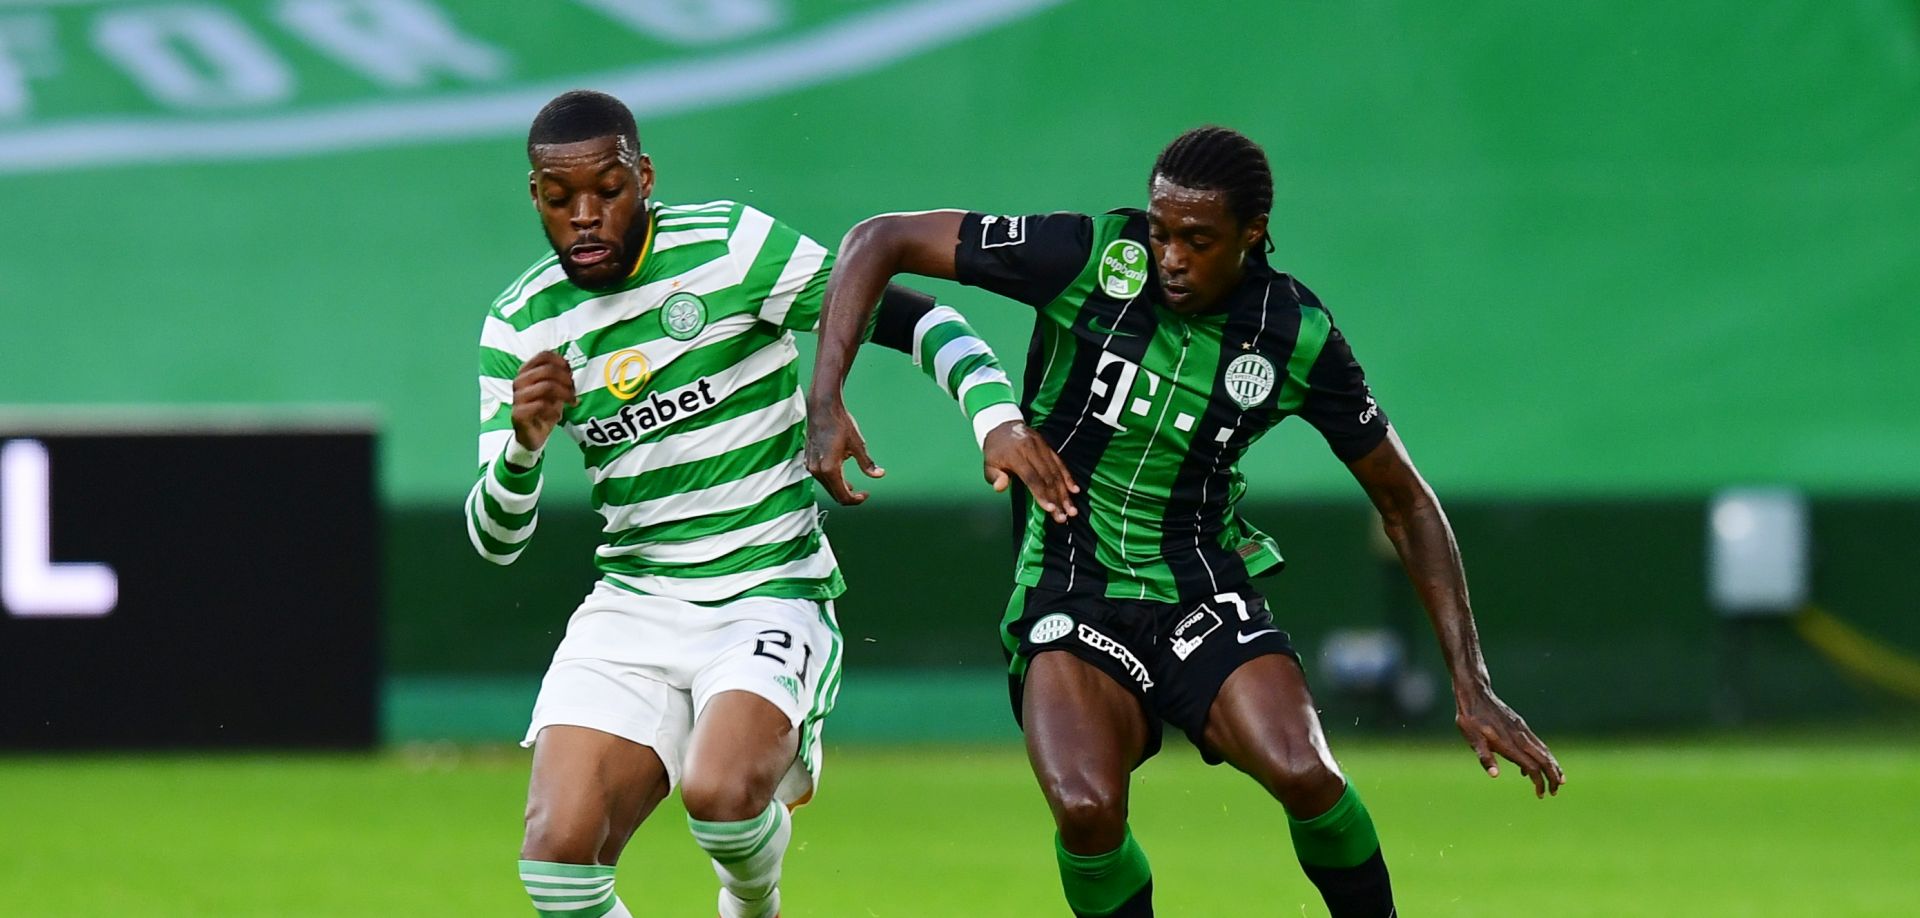 epa08627442 Olivier Ntcham of Celtic (L) in action against Wergiton do Rosario Calmon of Ferencvaros (R) during the UEFA Champions League second qualifying round match between Celtic Glasgow and Ferencvaros TC in Glasgow, Britain, 26 August 2020.  EPA/Mark Runnacles / POOL